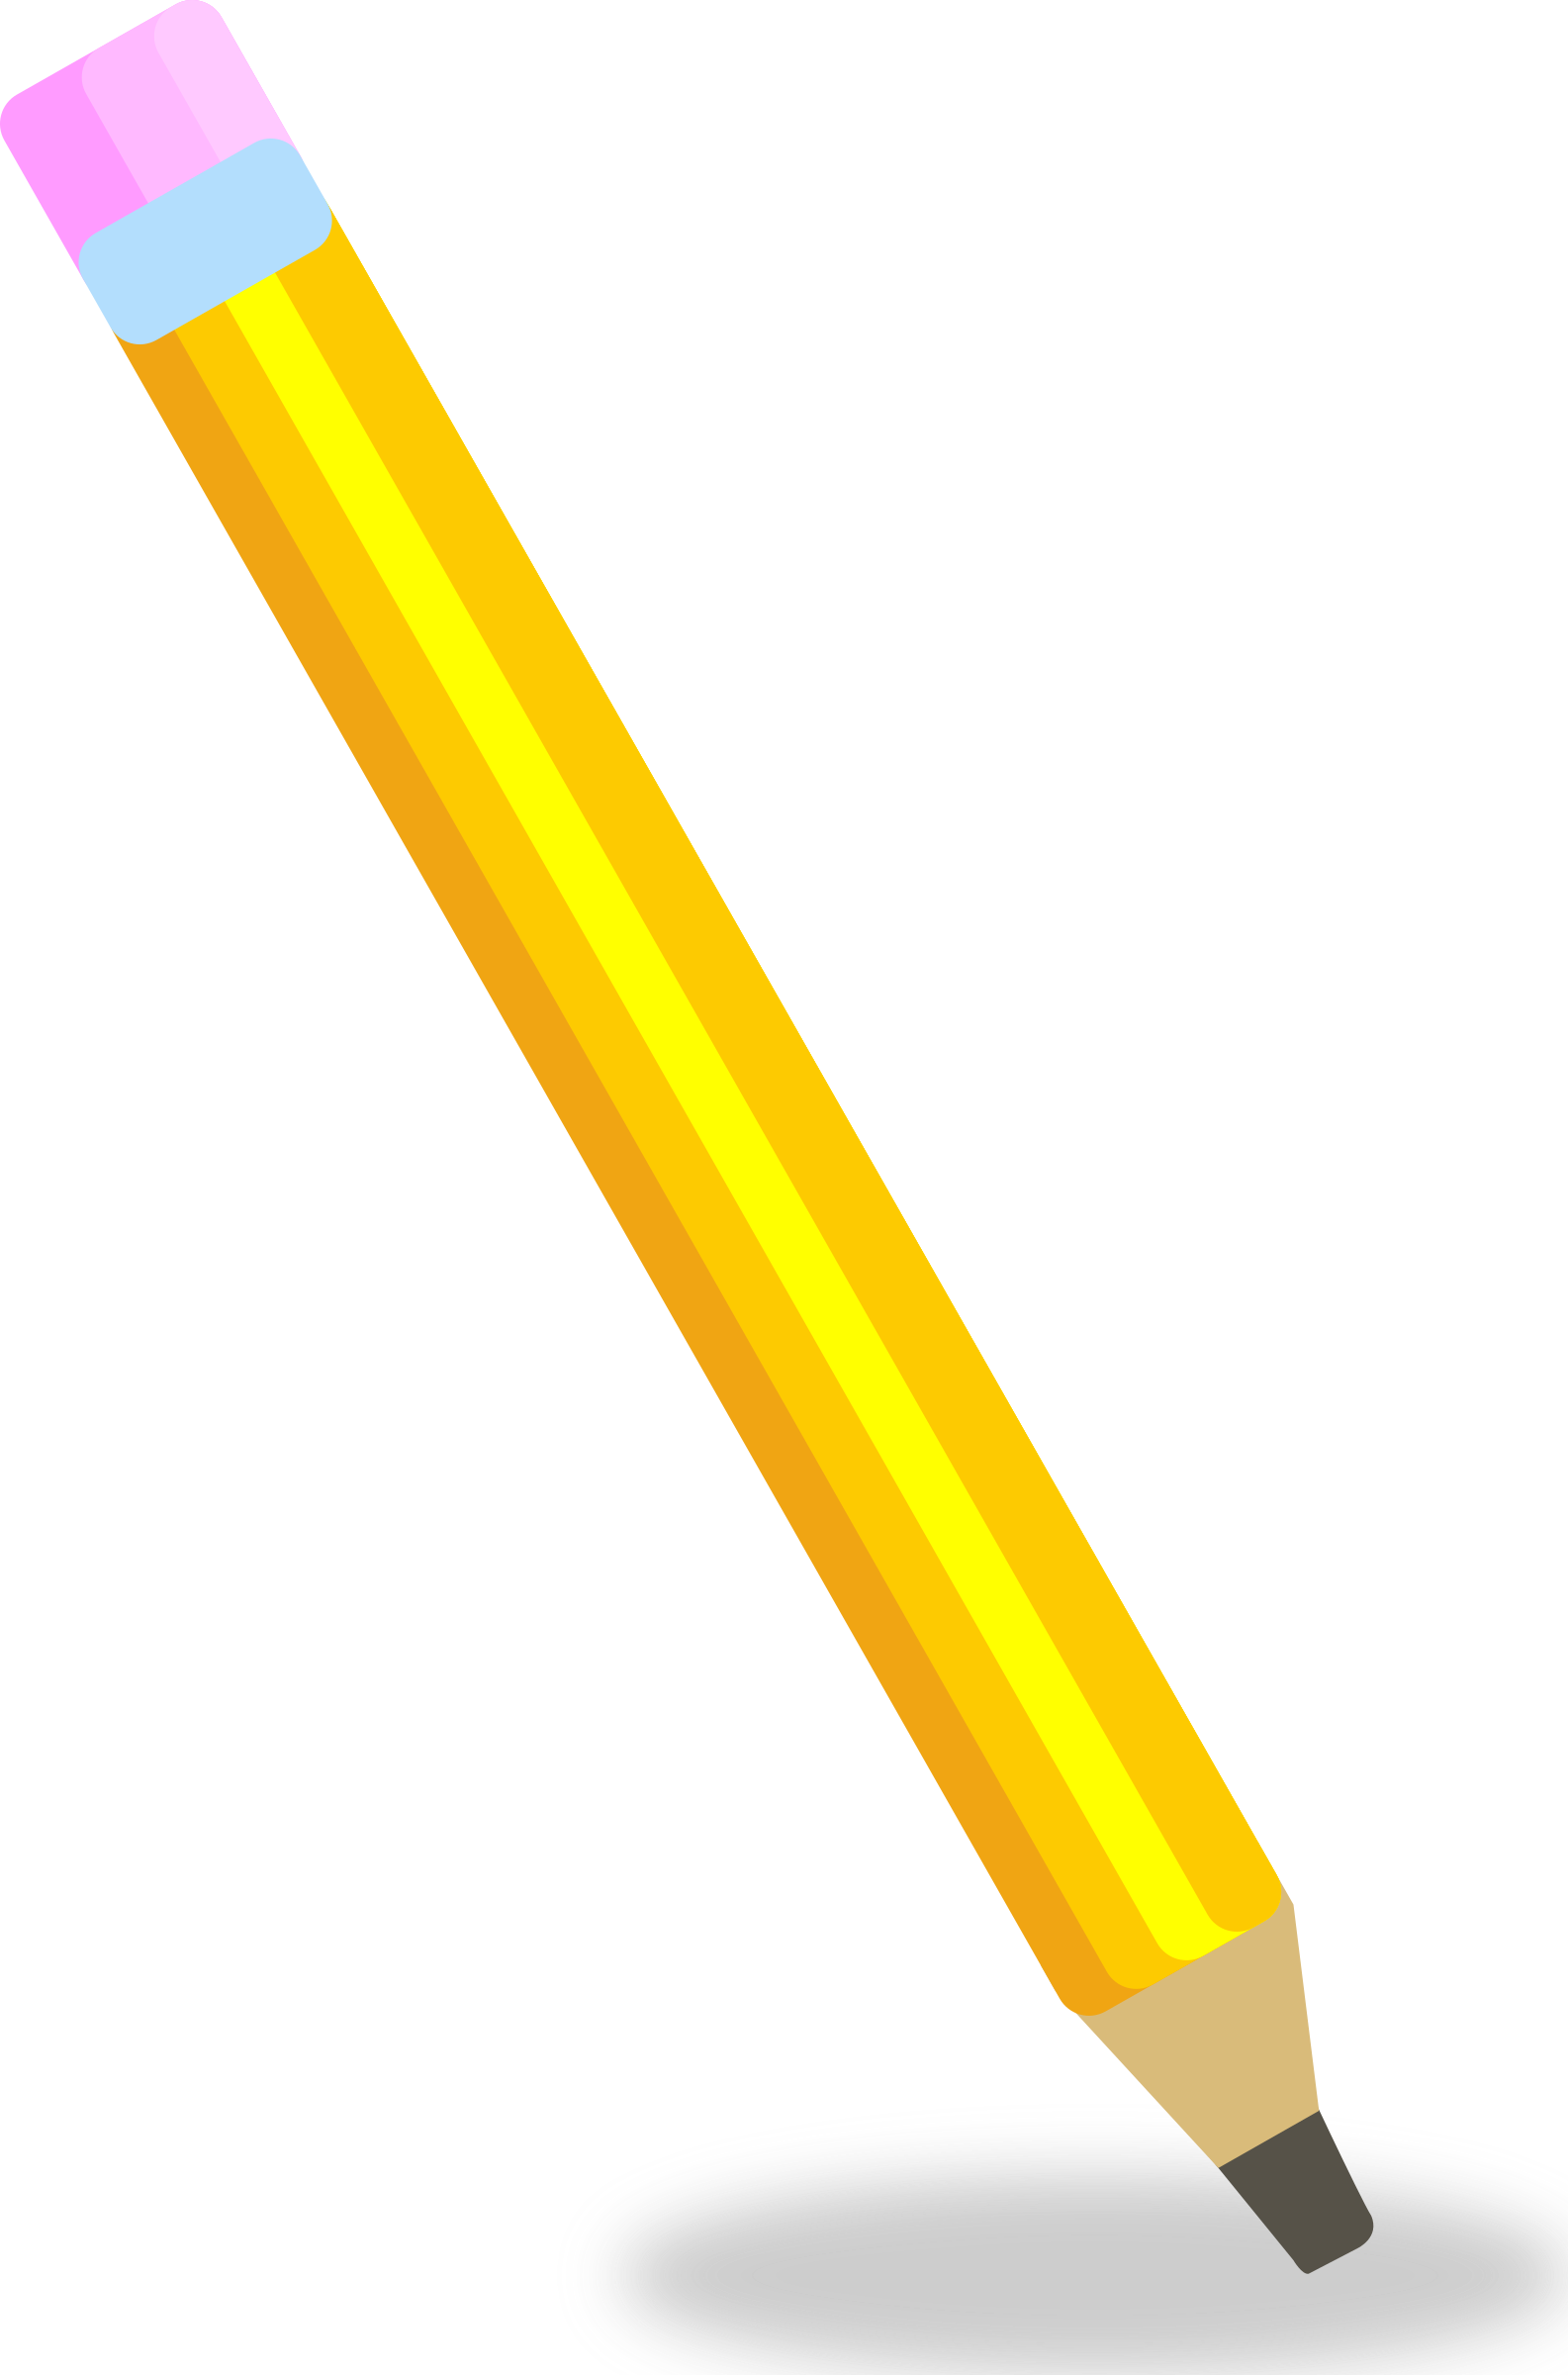 number clipart pencil